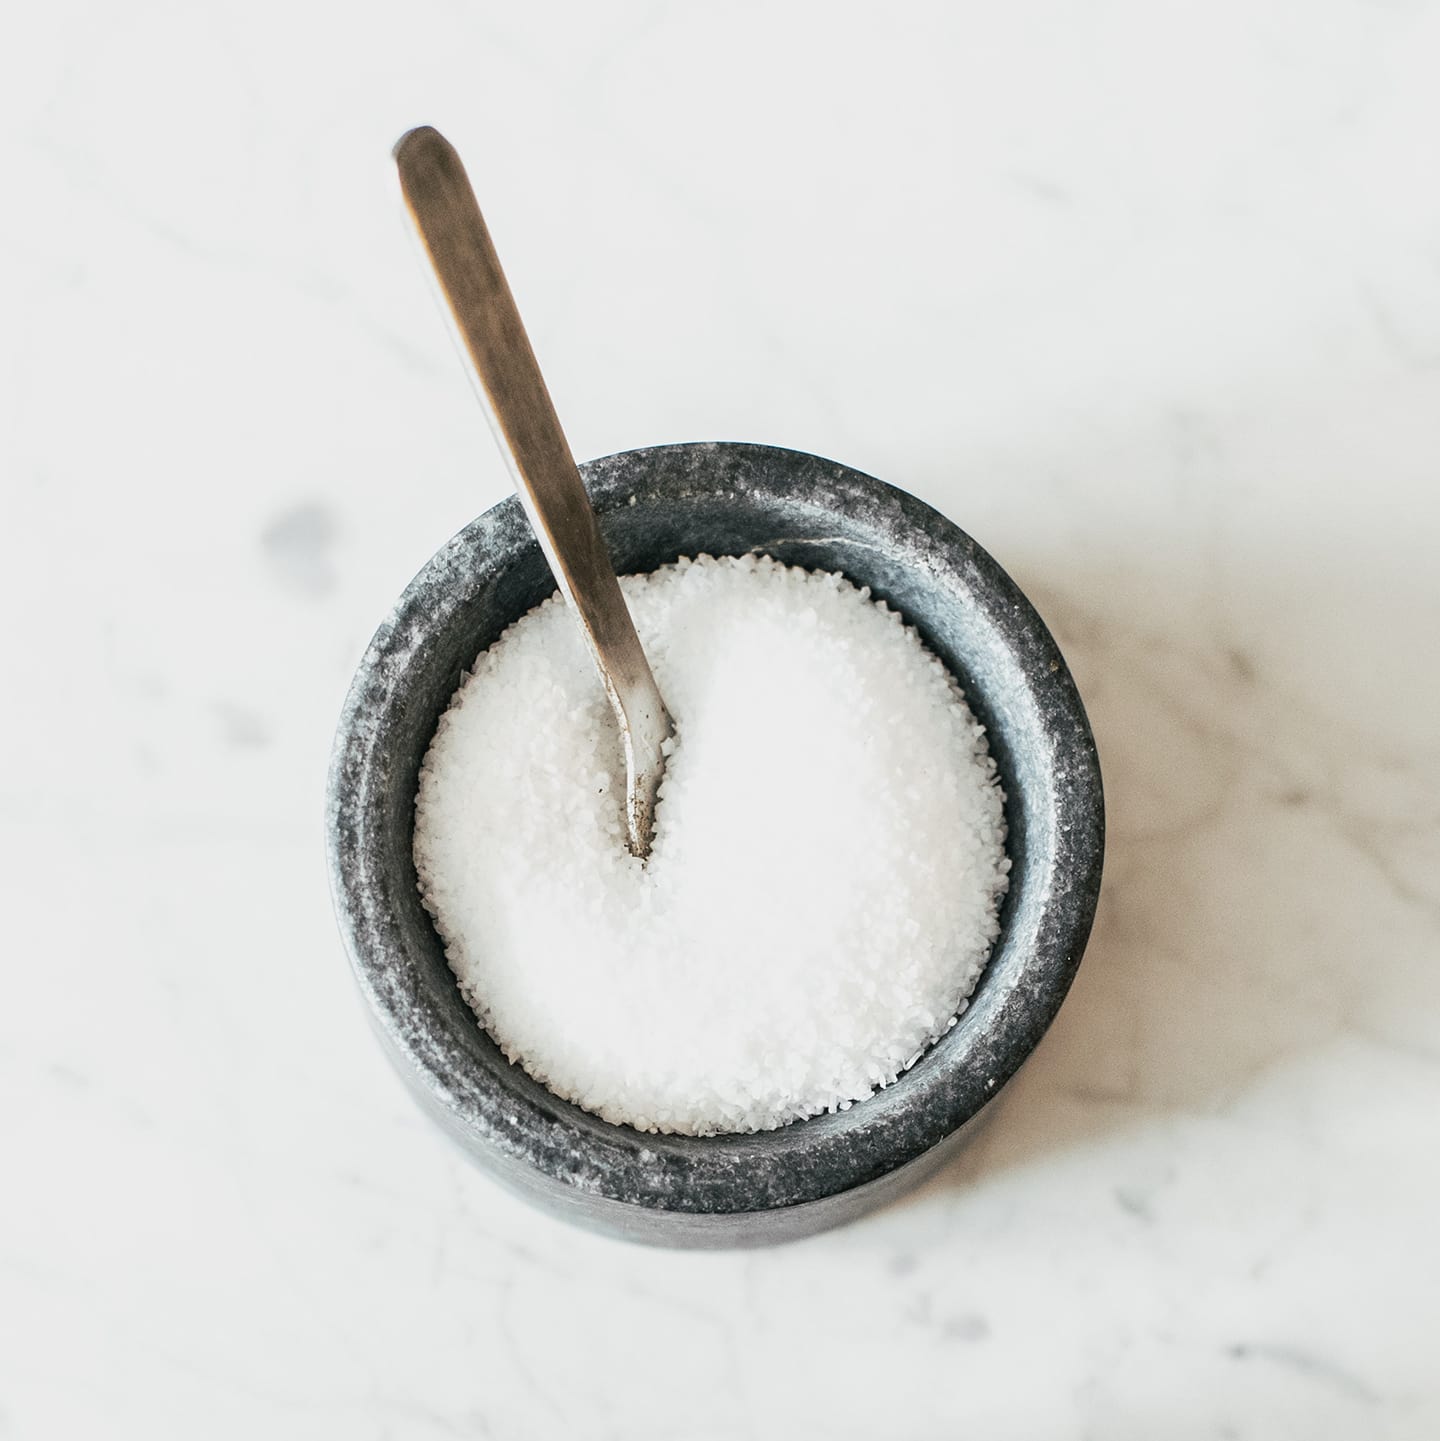 Cup containing white sugar and a spoon